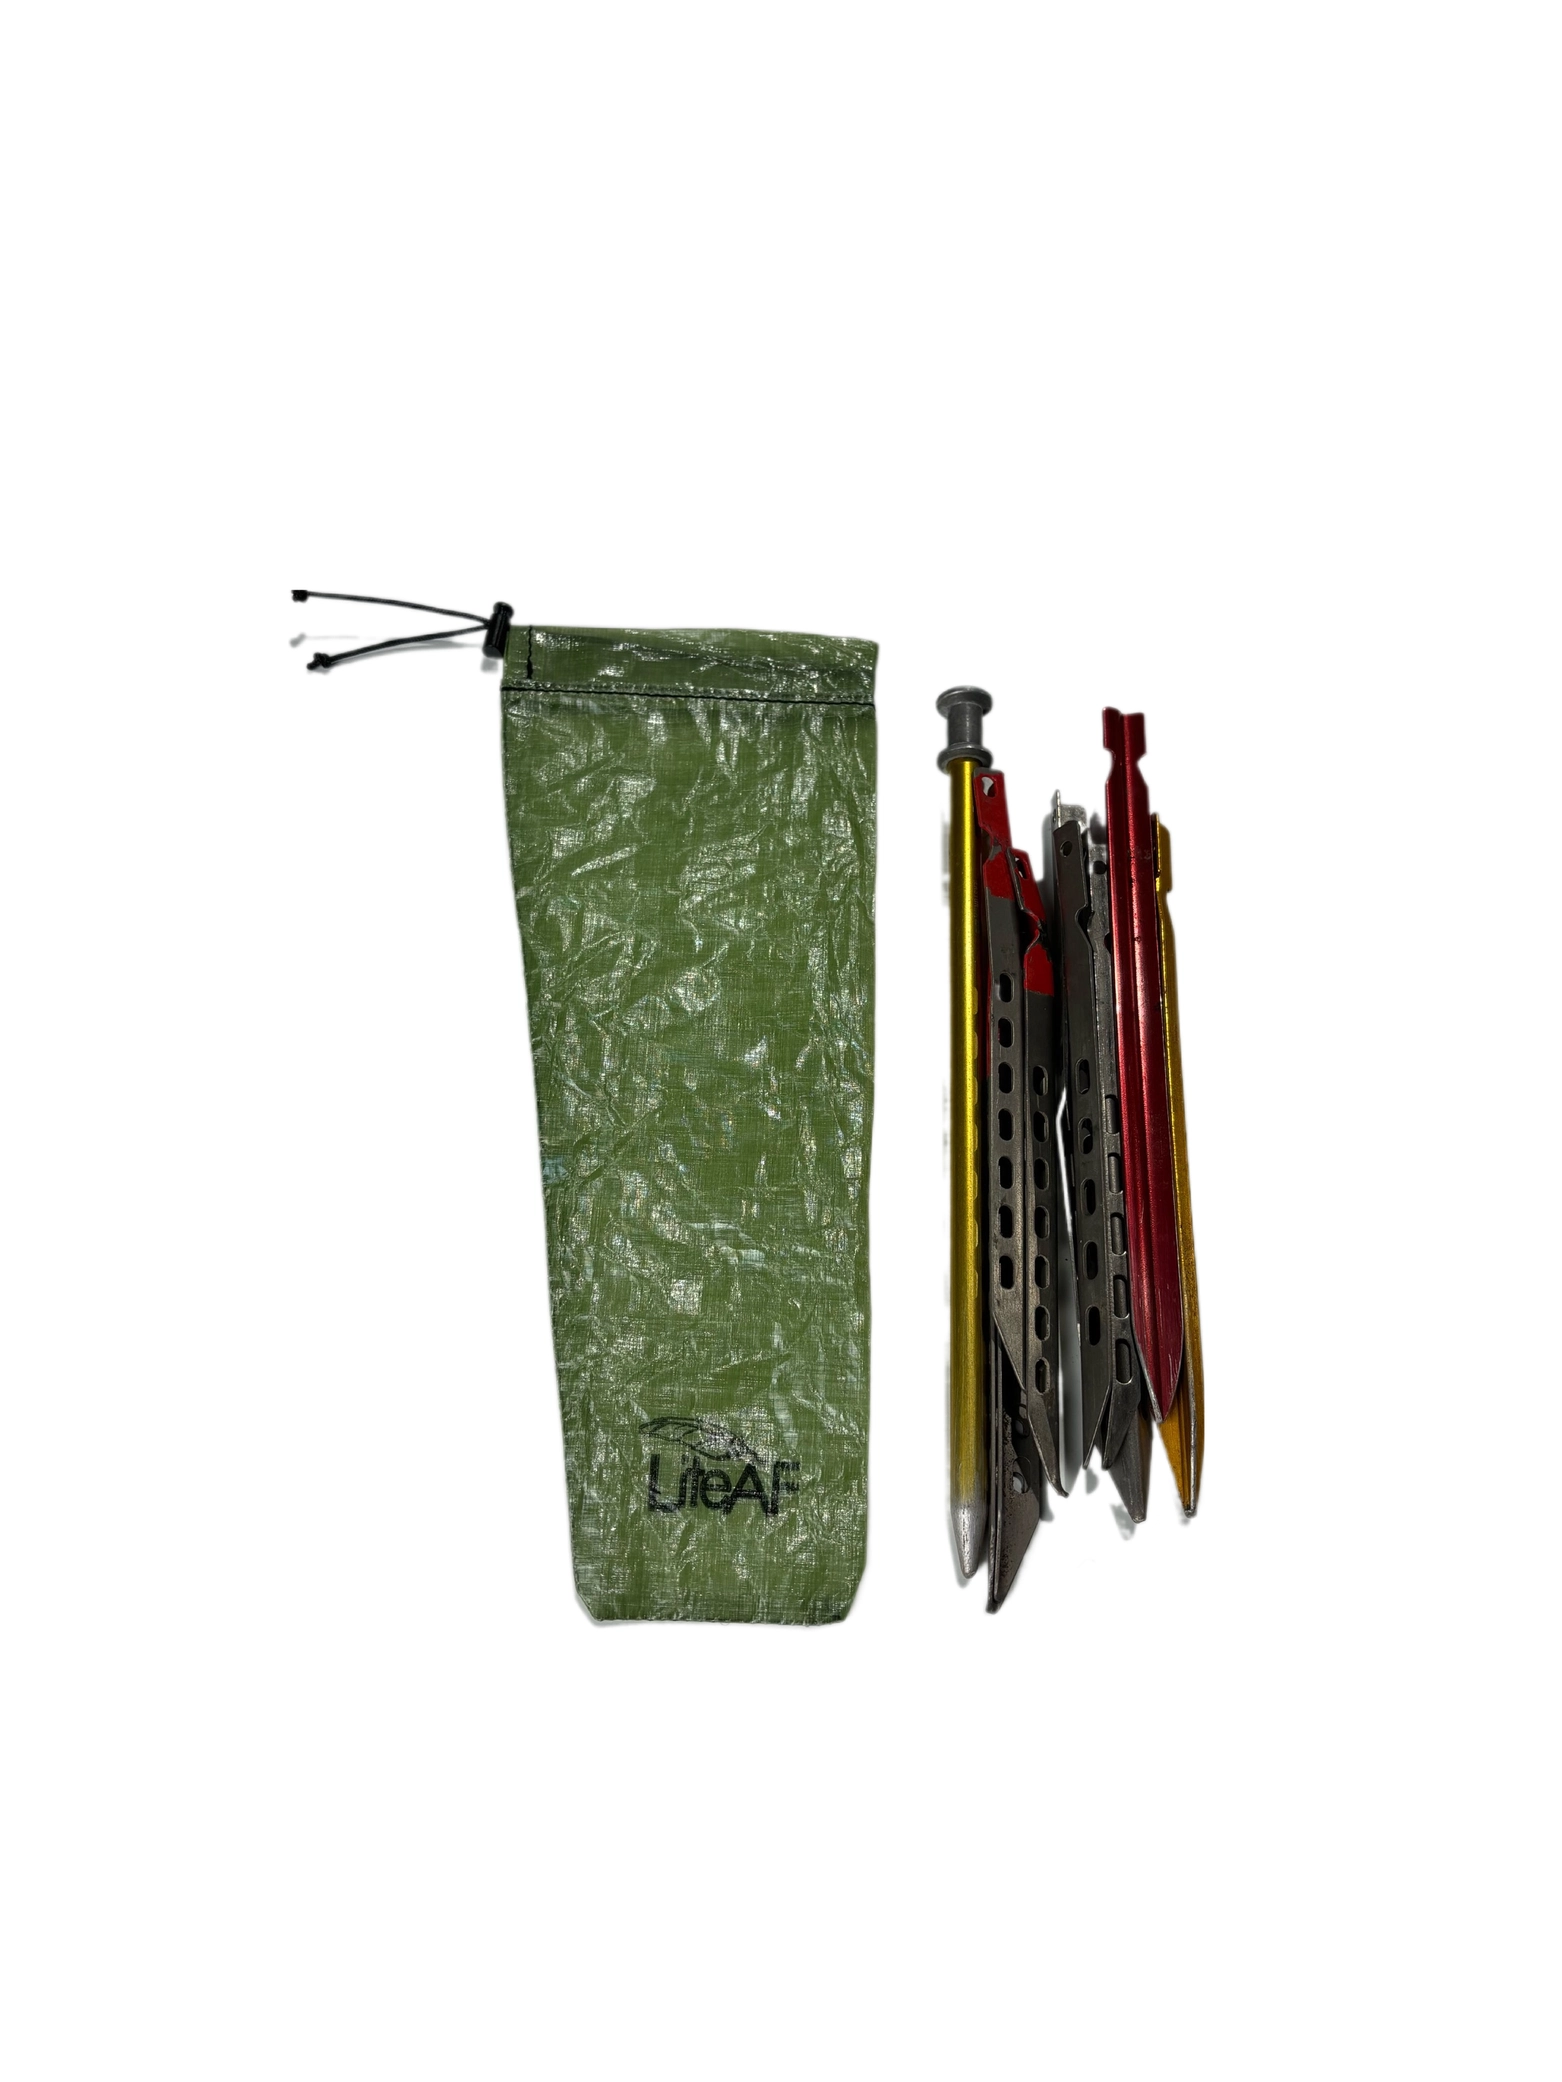 Endurance Inner Tent Bag - Access Expedition Kit